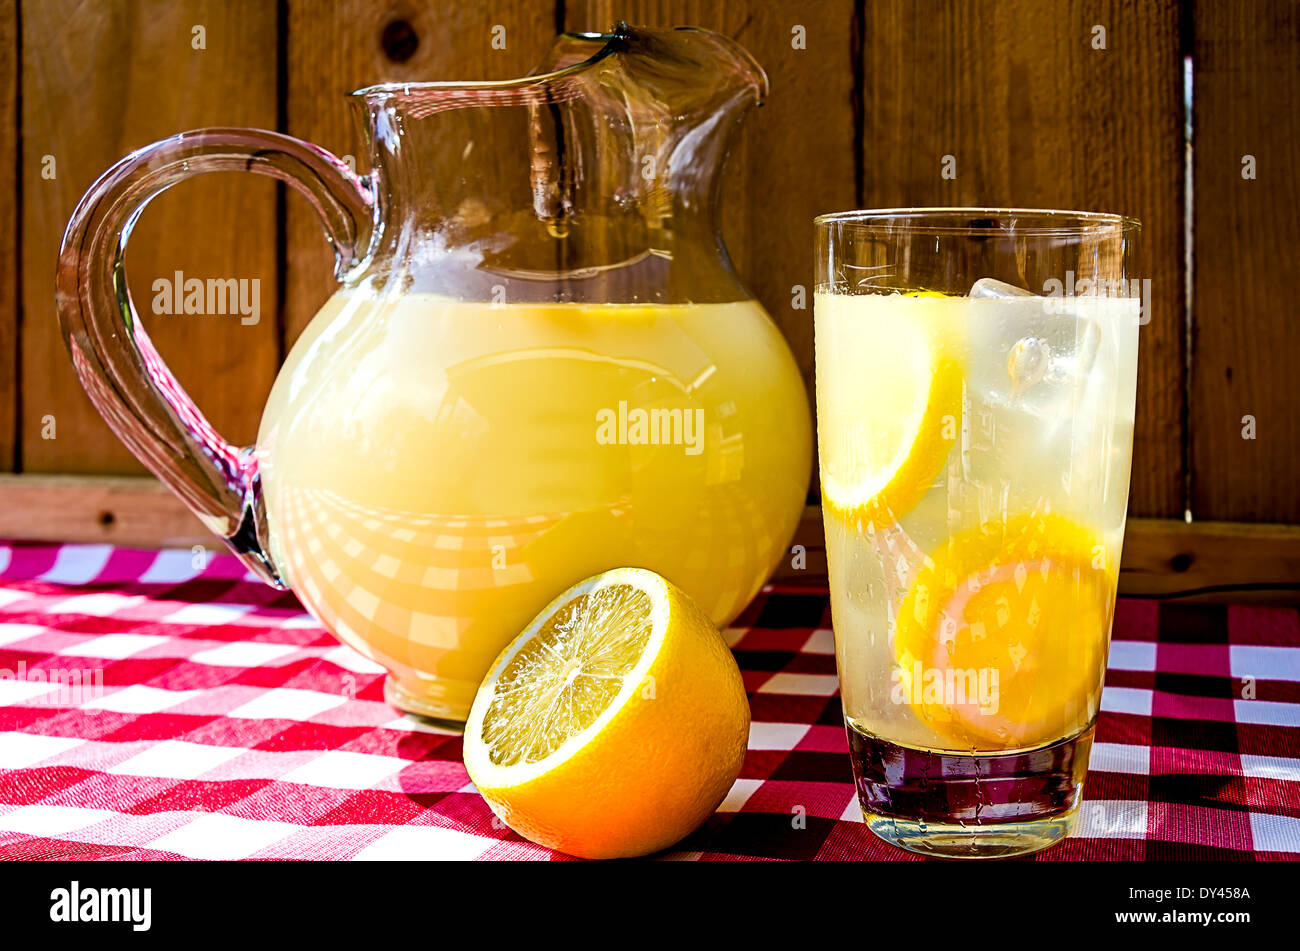 Lemonade and pitcher with sliced lemons on red gingham table cloth. Stock Photo